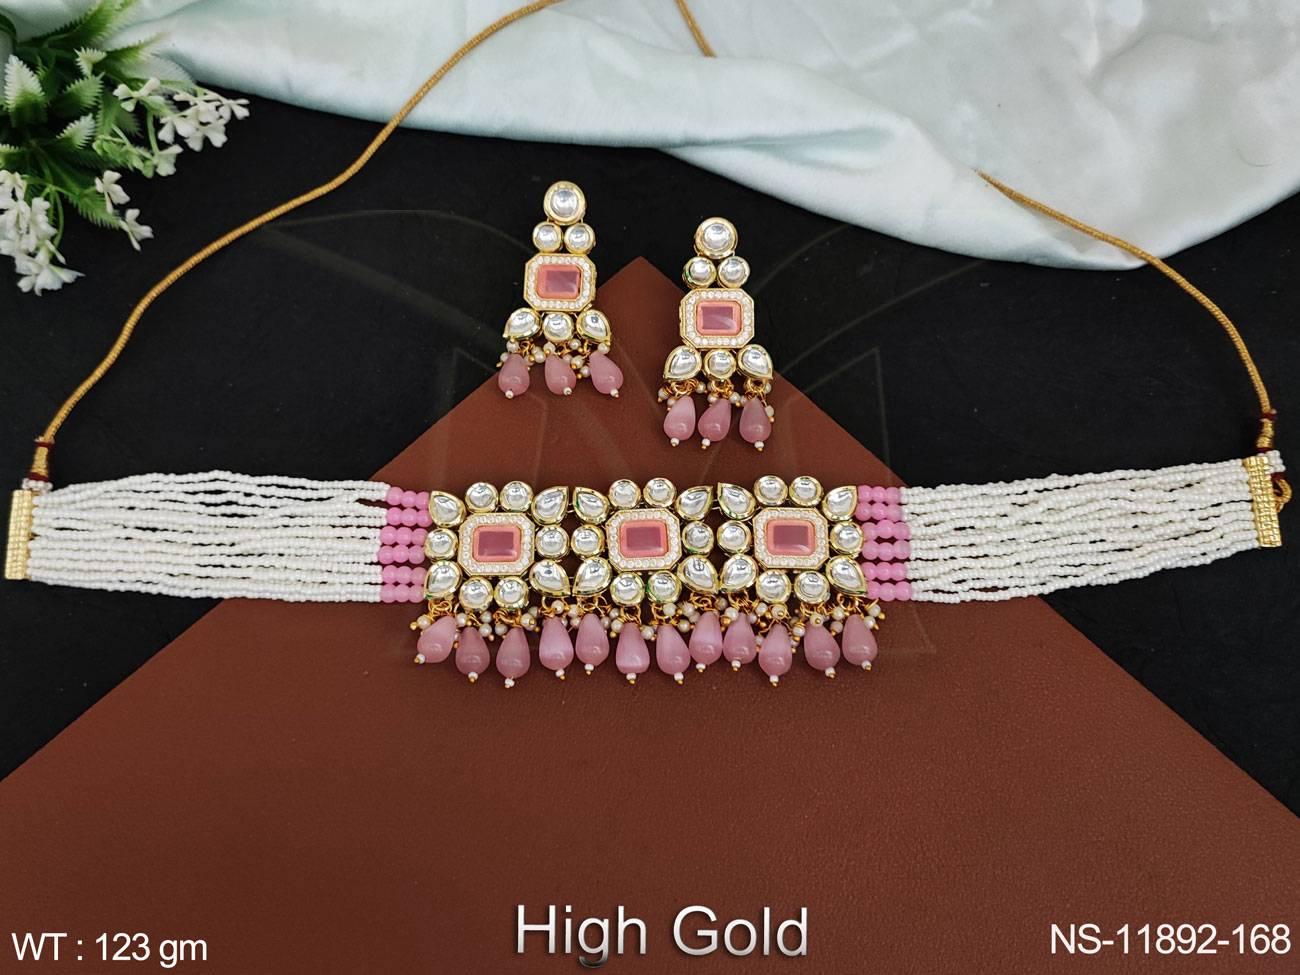 The intricate Kundan stones add a touch of opulence. Elevate your look with this stunning necklace set.